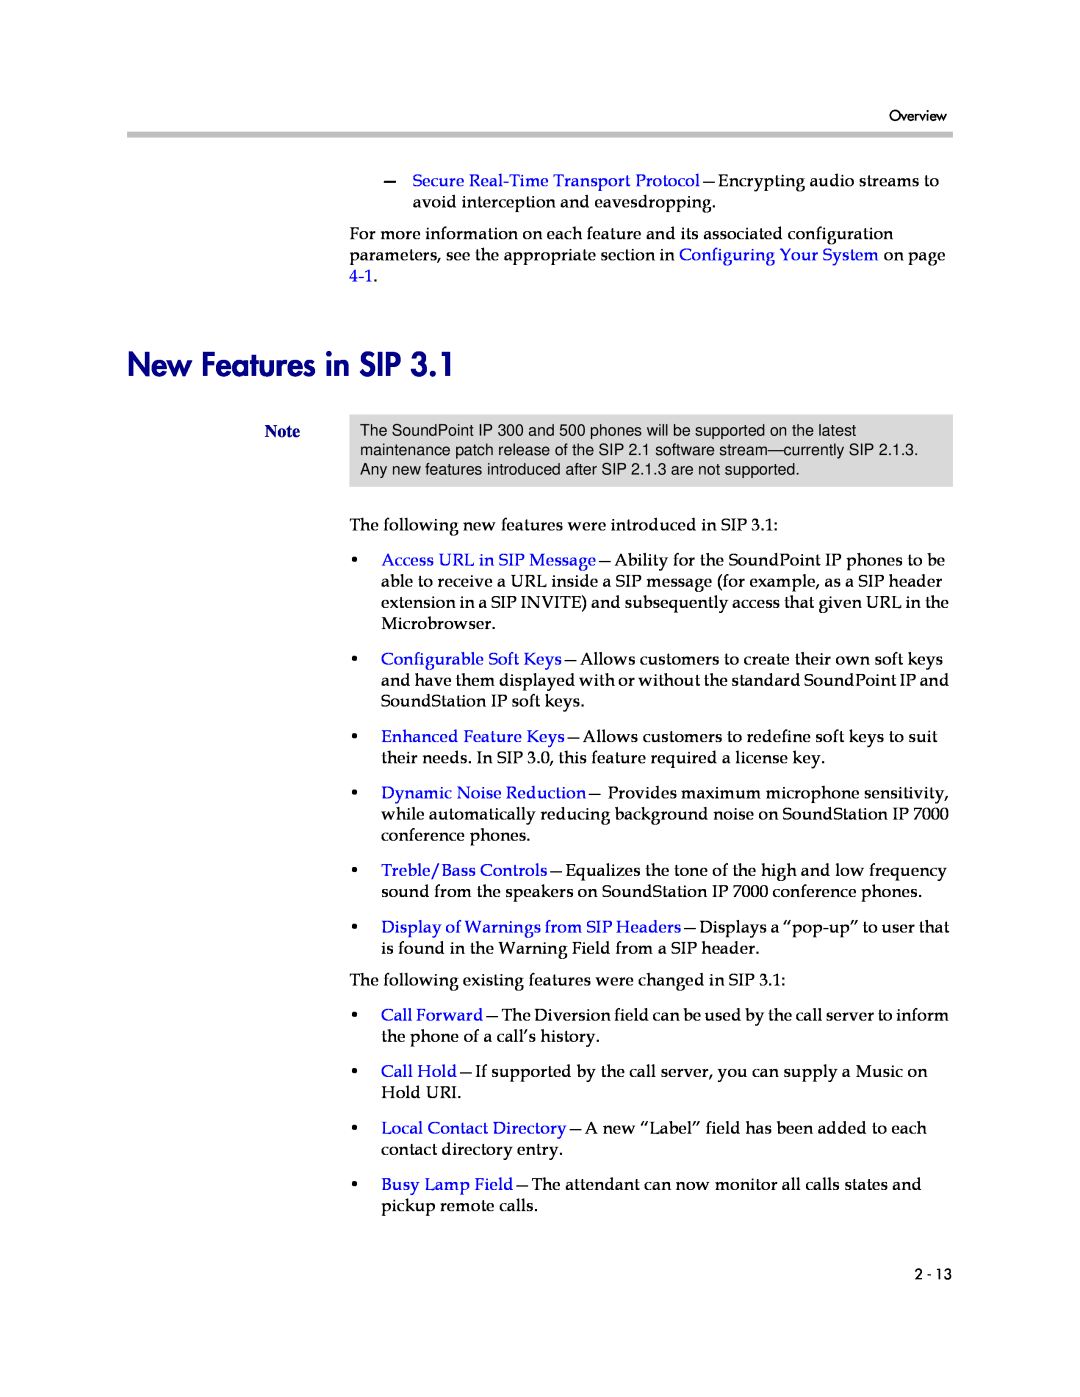 Polycom SIP 3.1 manual New Features in SIP 